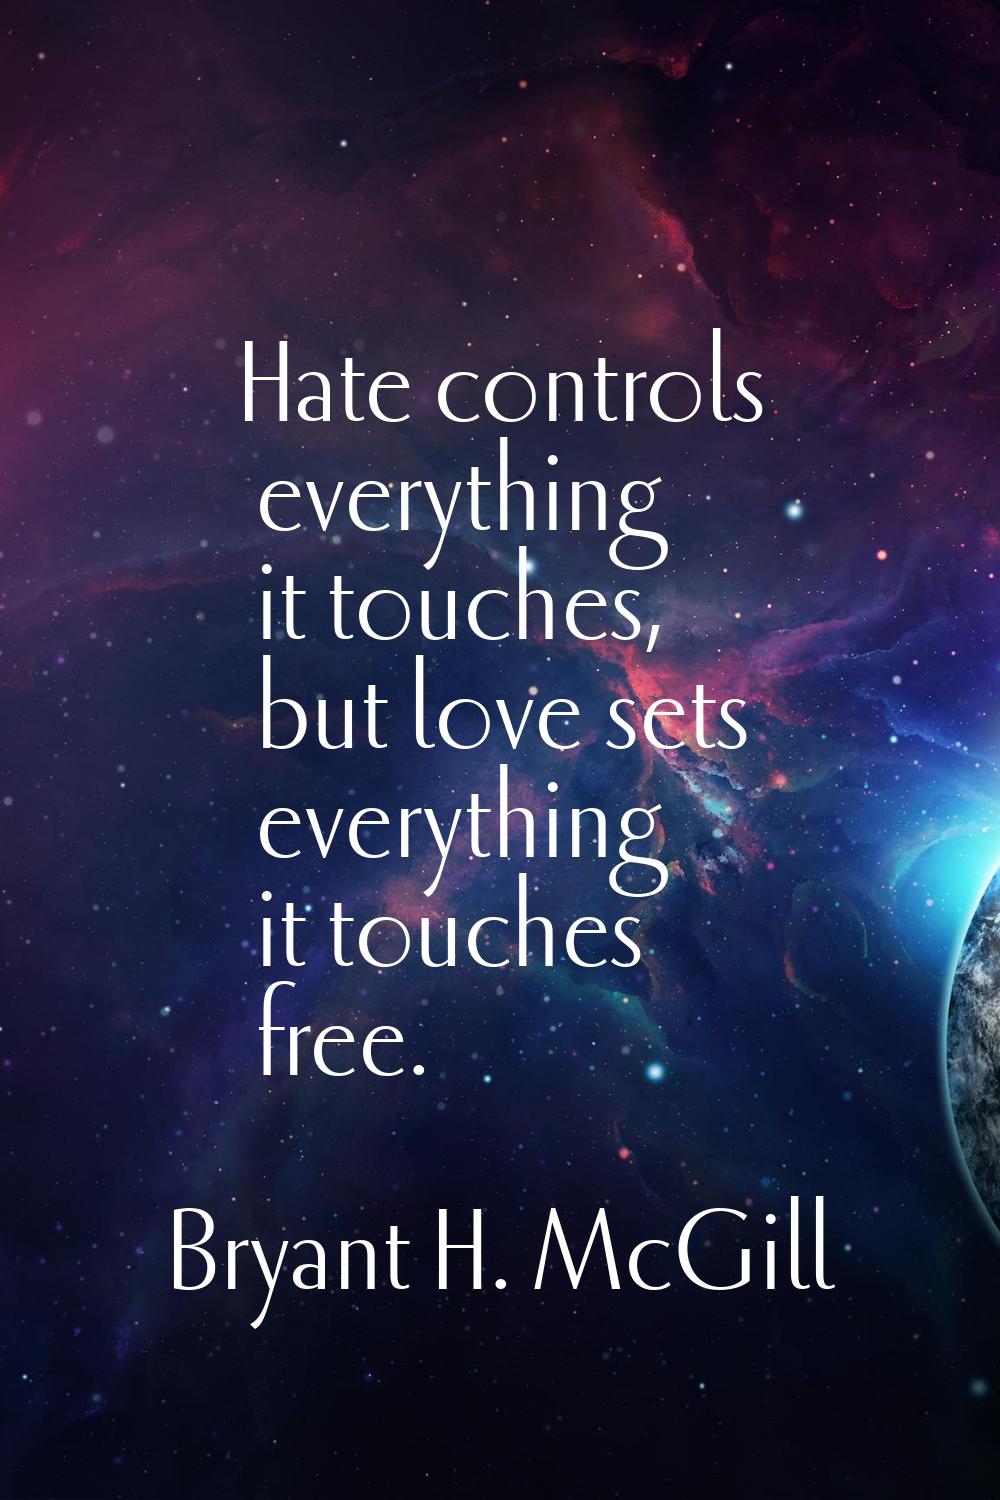 Hate controls everything it touches, but love sets everything it touches free.